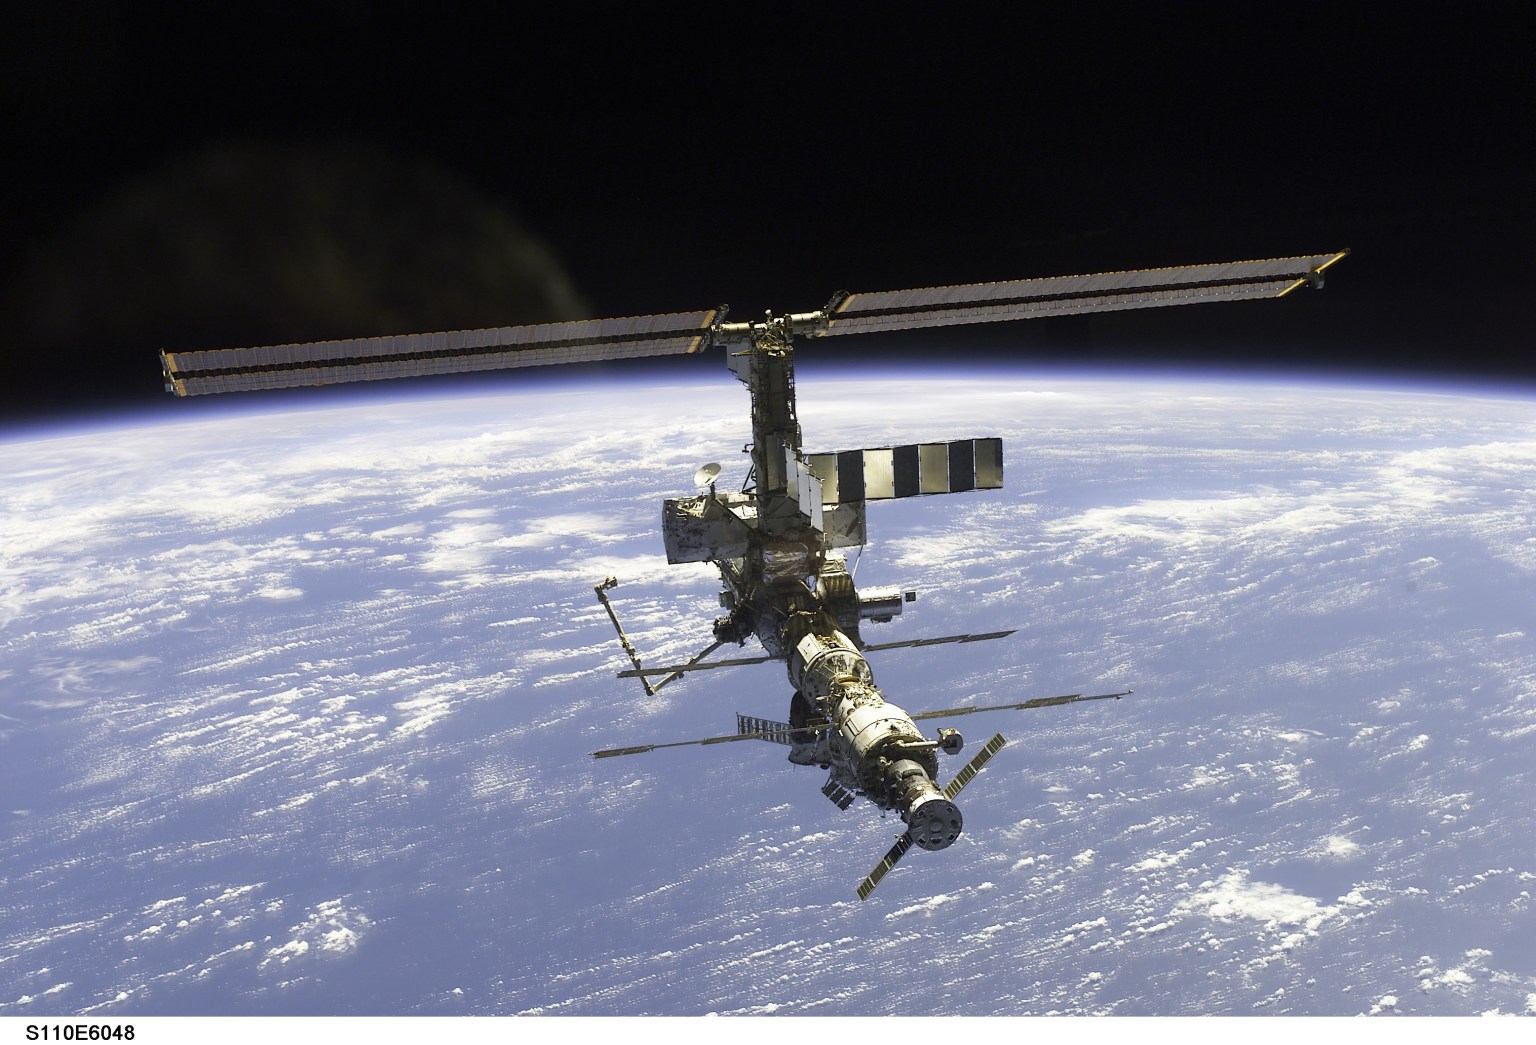 The International Space Station, with its newly installed S0 (Starboard) truss on the Unity module, was pictured from space shuttle Endeavour after it undocked on April 17, 2002.